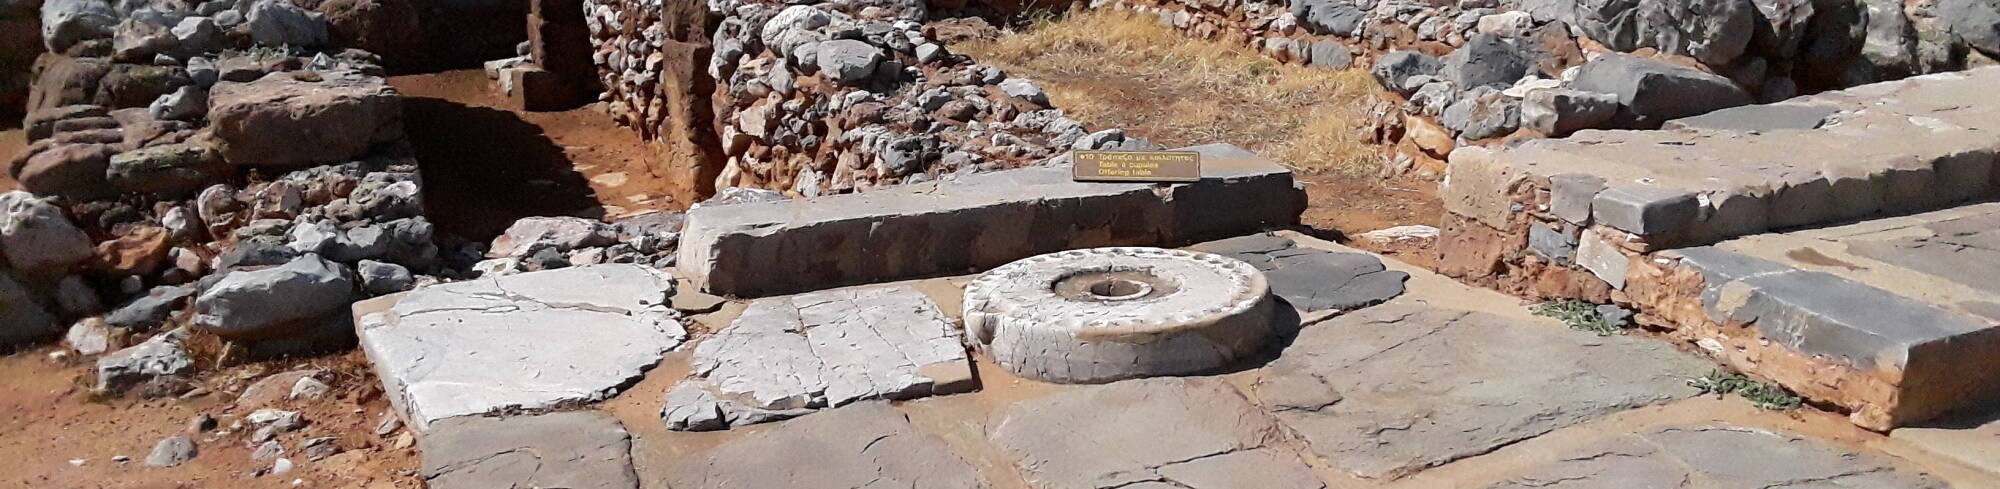 Speculated 'Offering Table' at the Minoan palace of Malia.